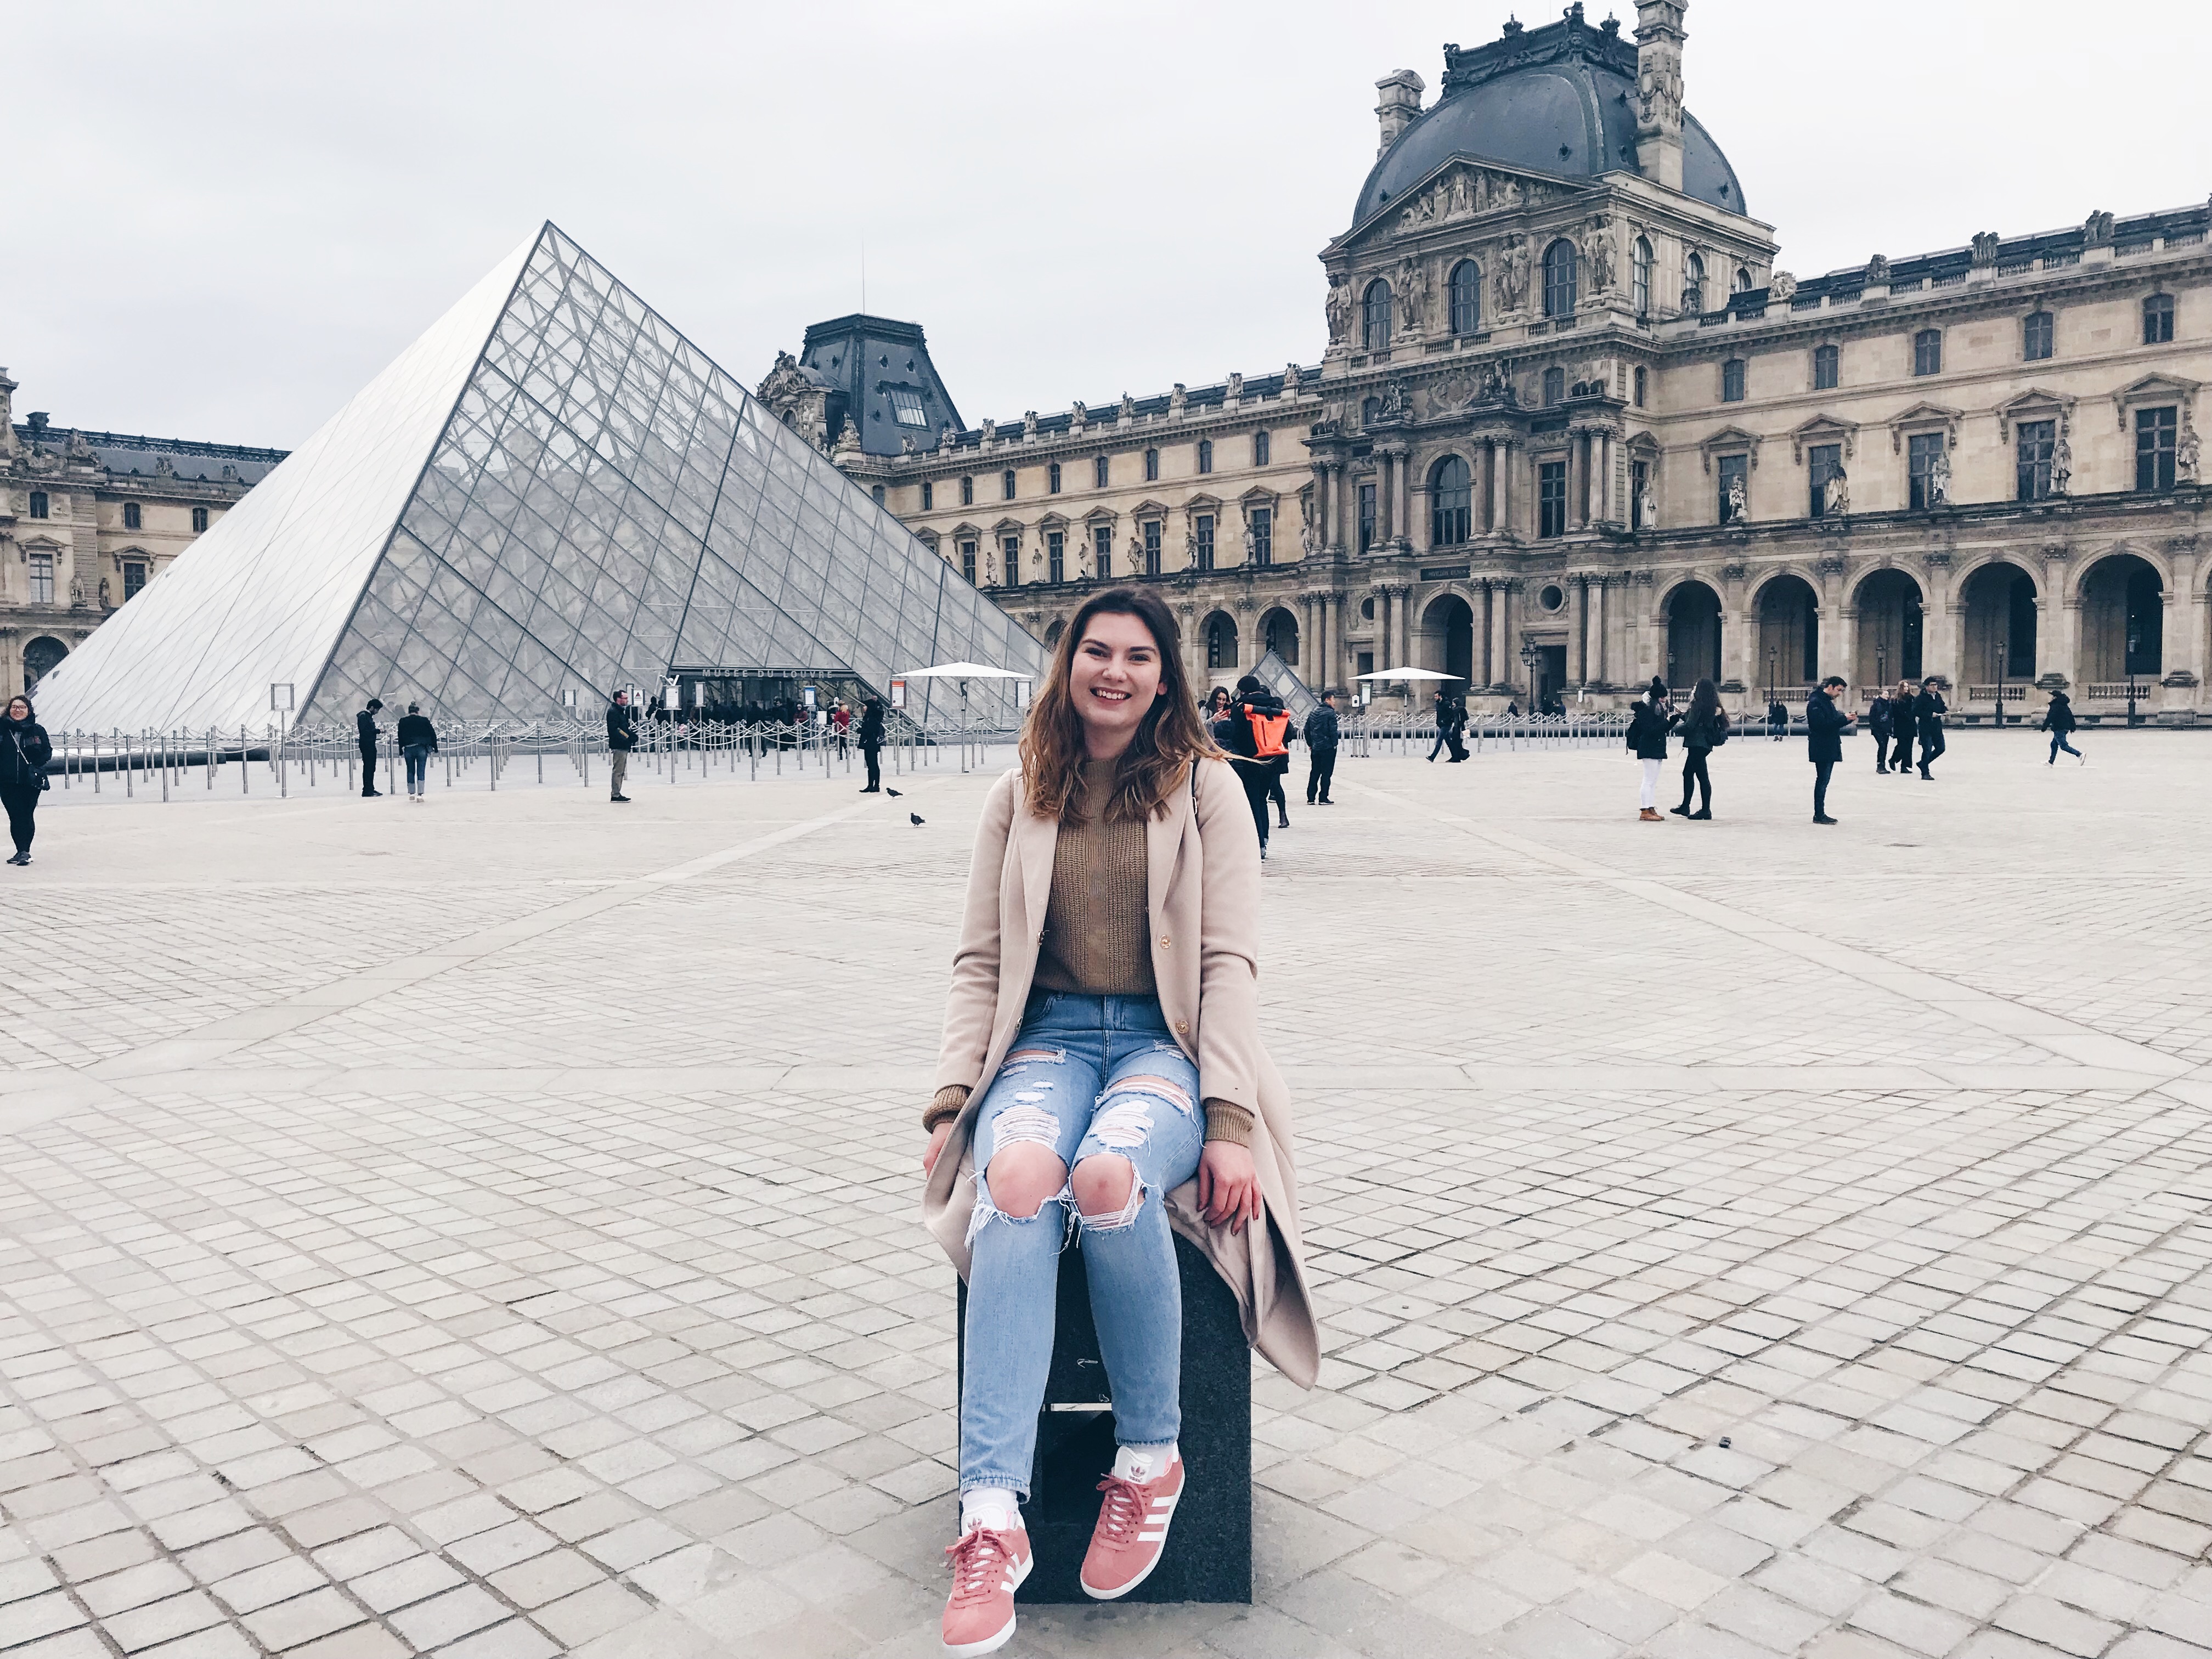 two days in paris itinerary - the louvre 